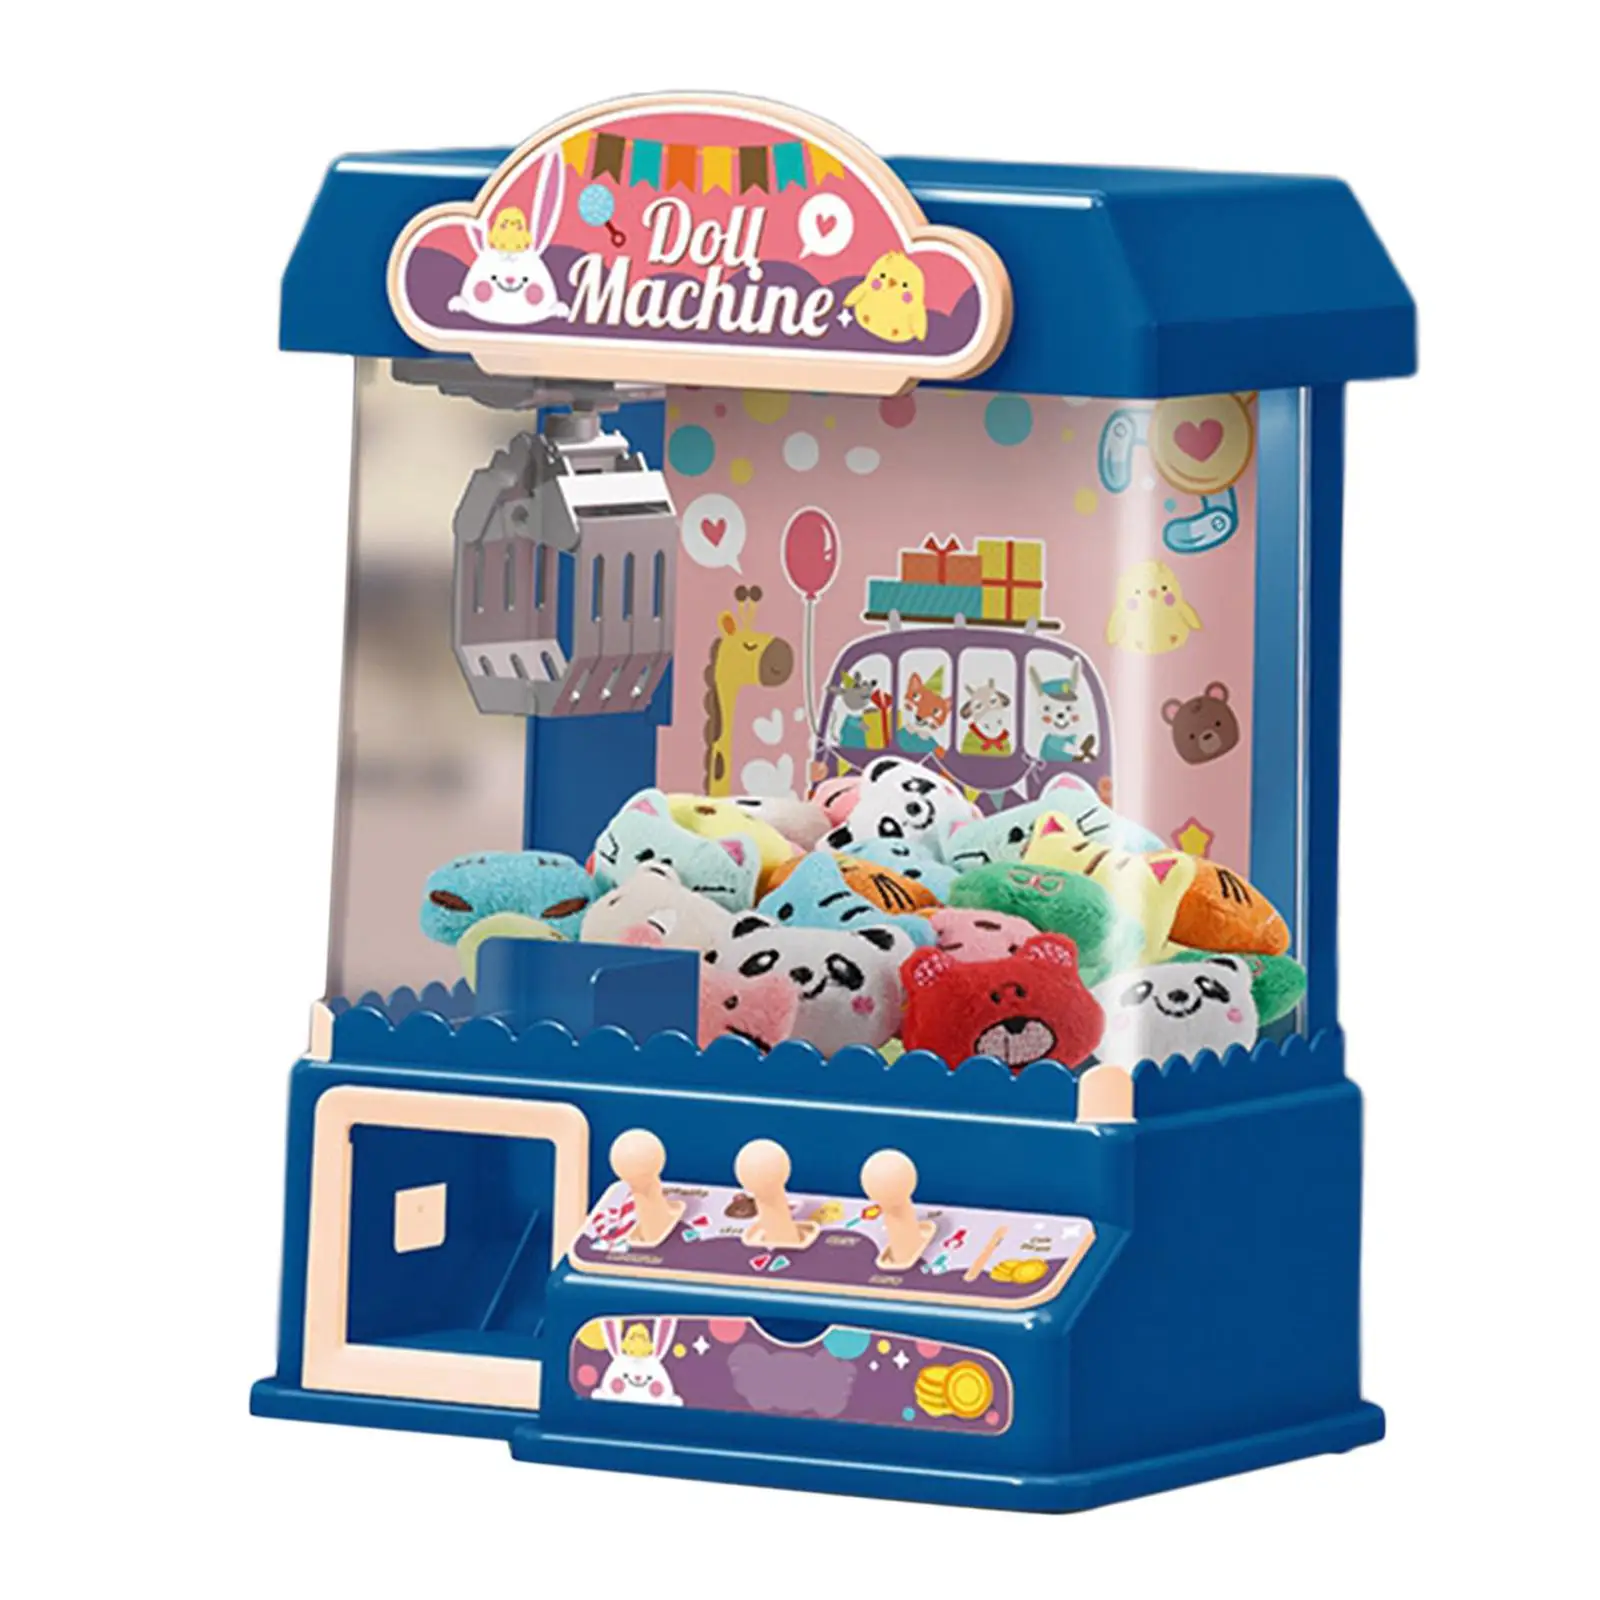 Candy Grabber DIY Doll Claw Machine Toy Prize Dispenser Vending Machine Toy Practical Manual Doll Machine for Game Festival Gift